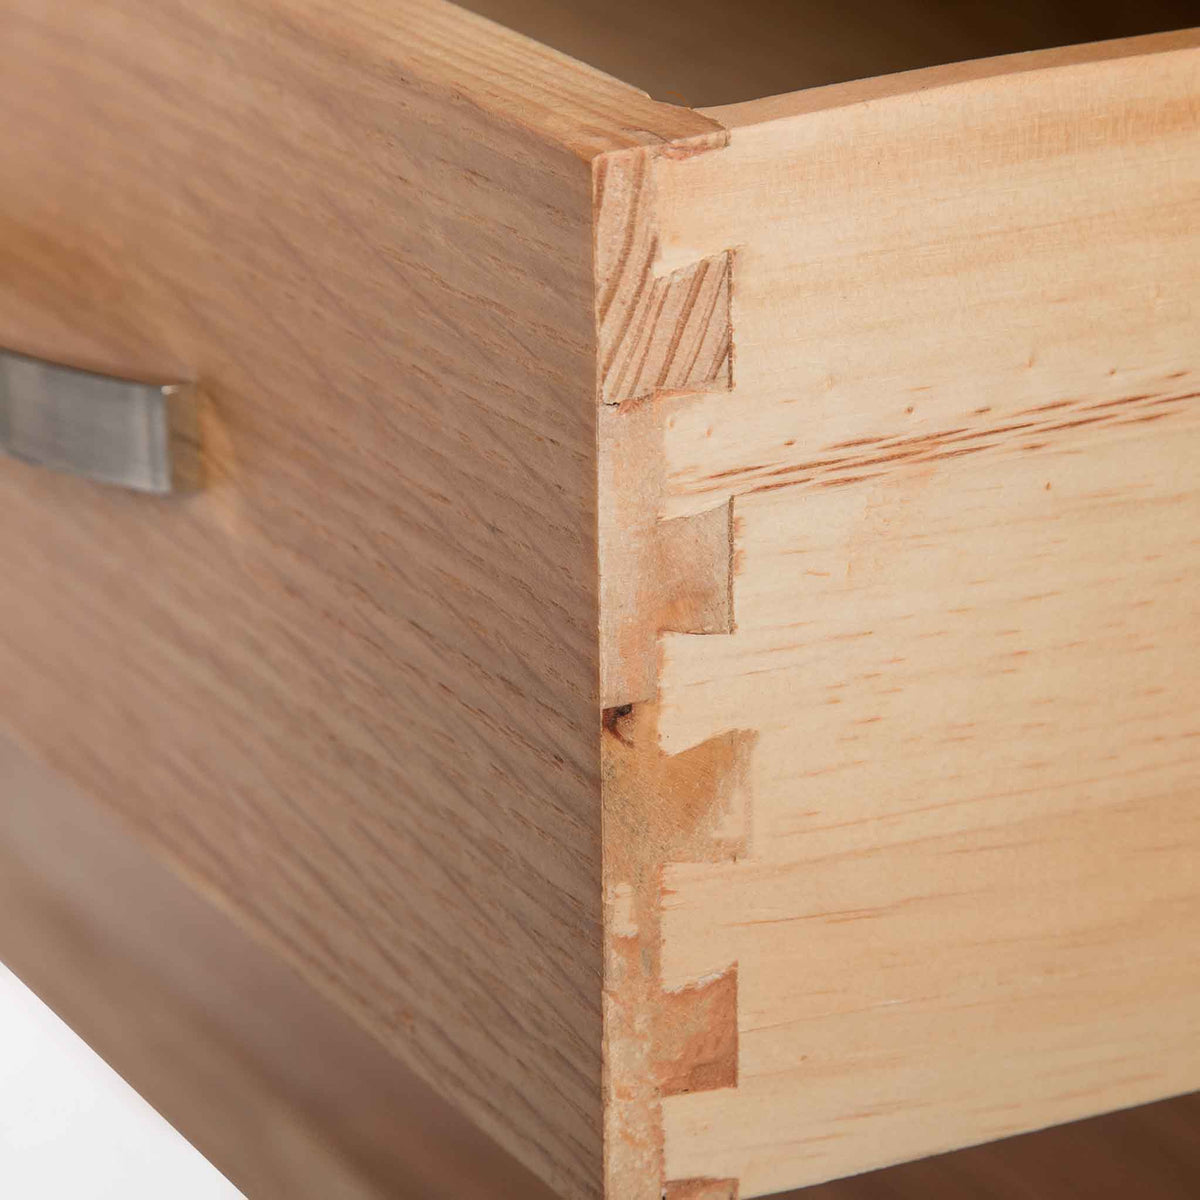 London Oak Coffee Table with Drawer - Close up of dovetail joint on Drawer